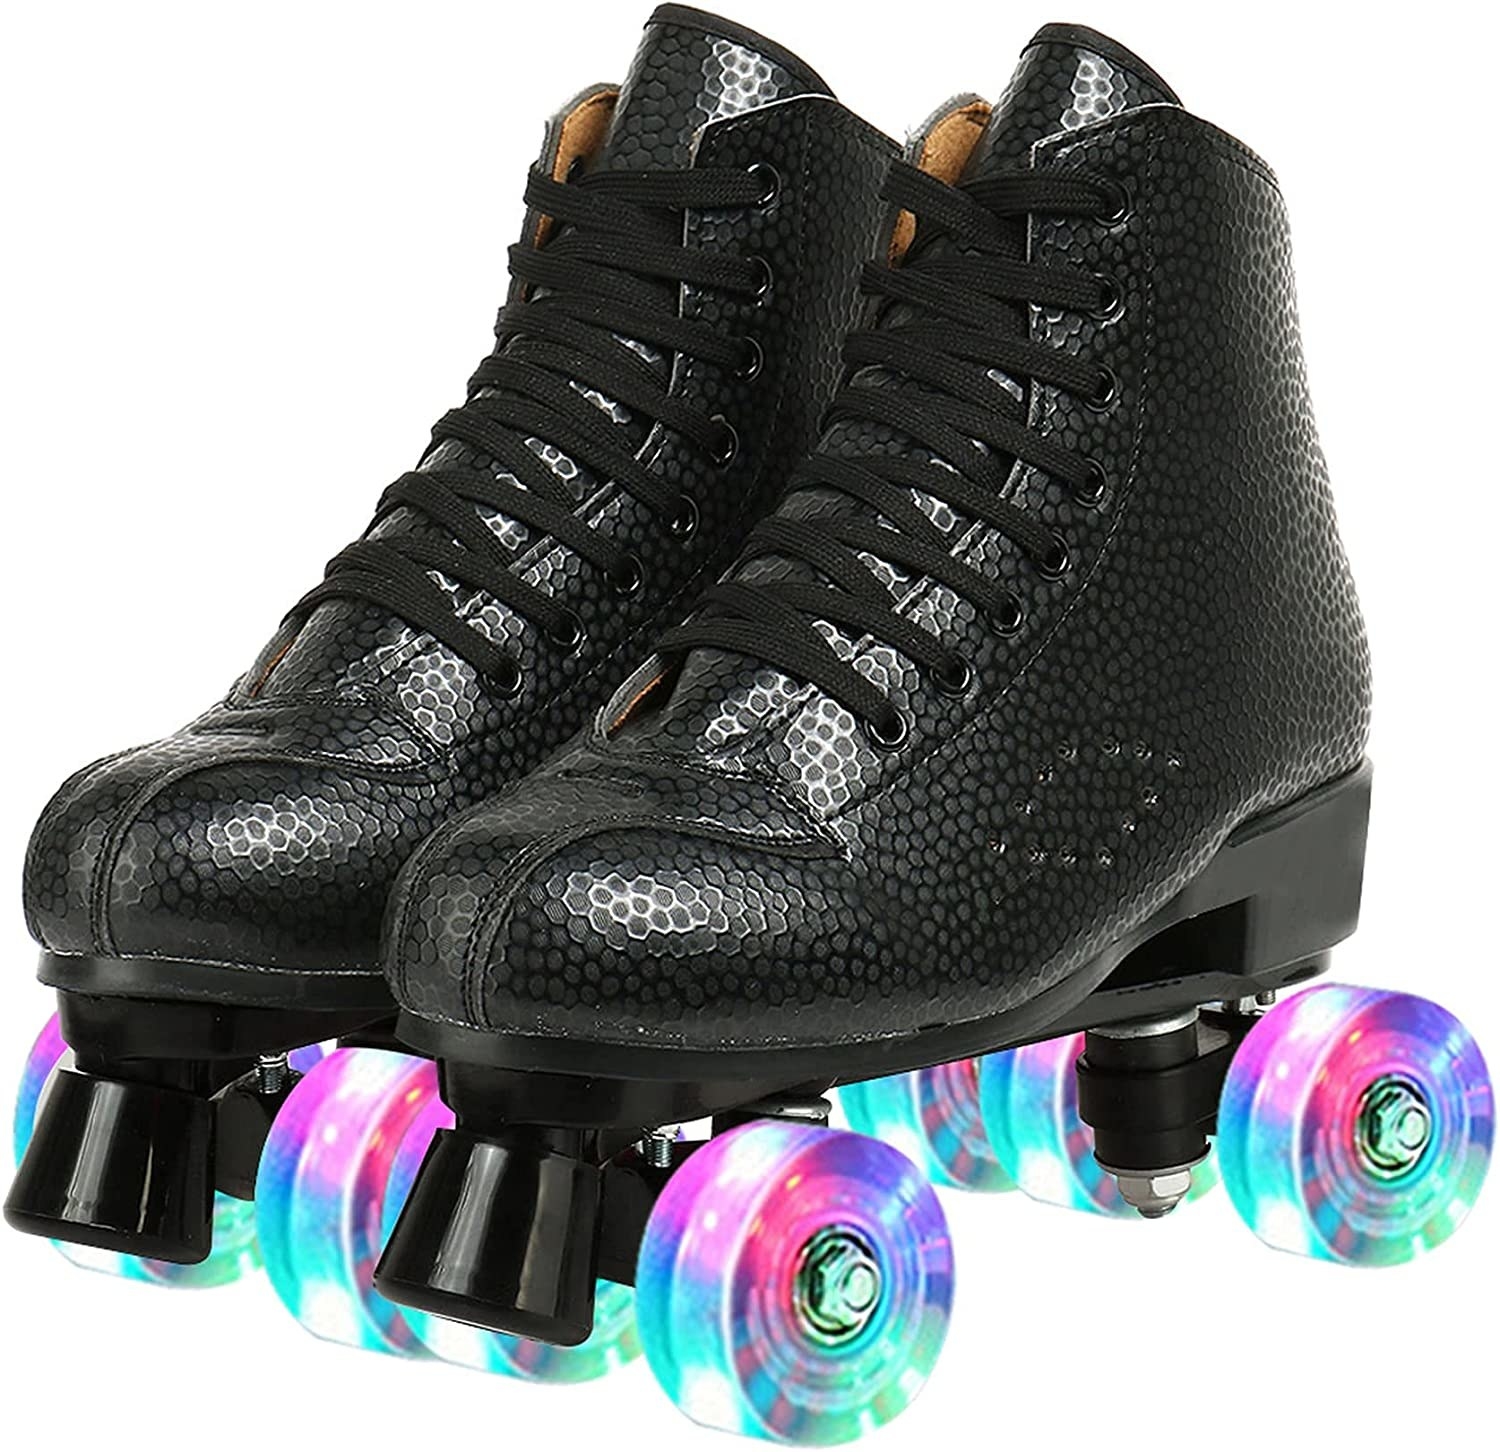 roller blades with light-up wheels on a white background